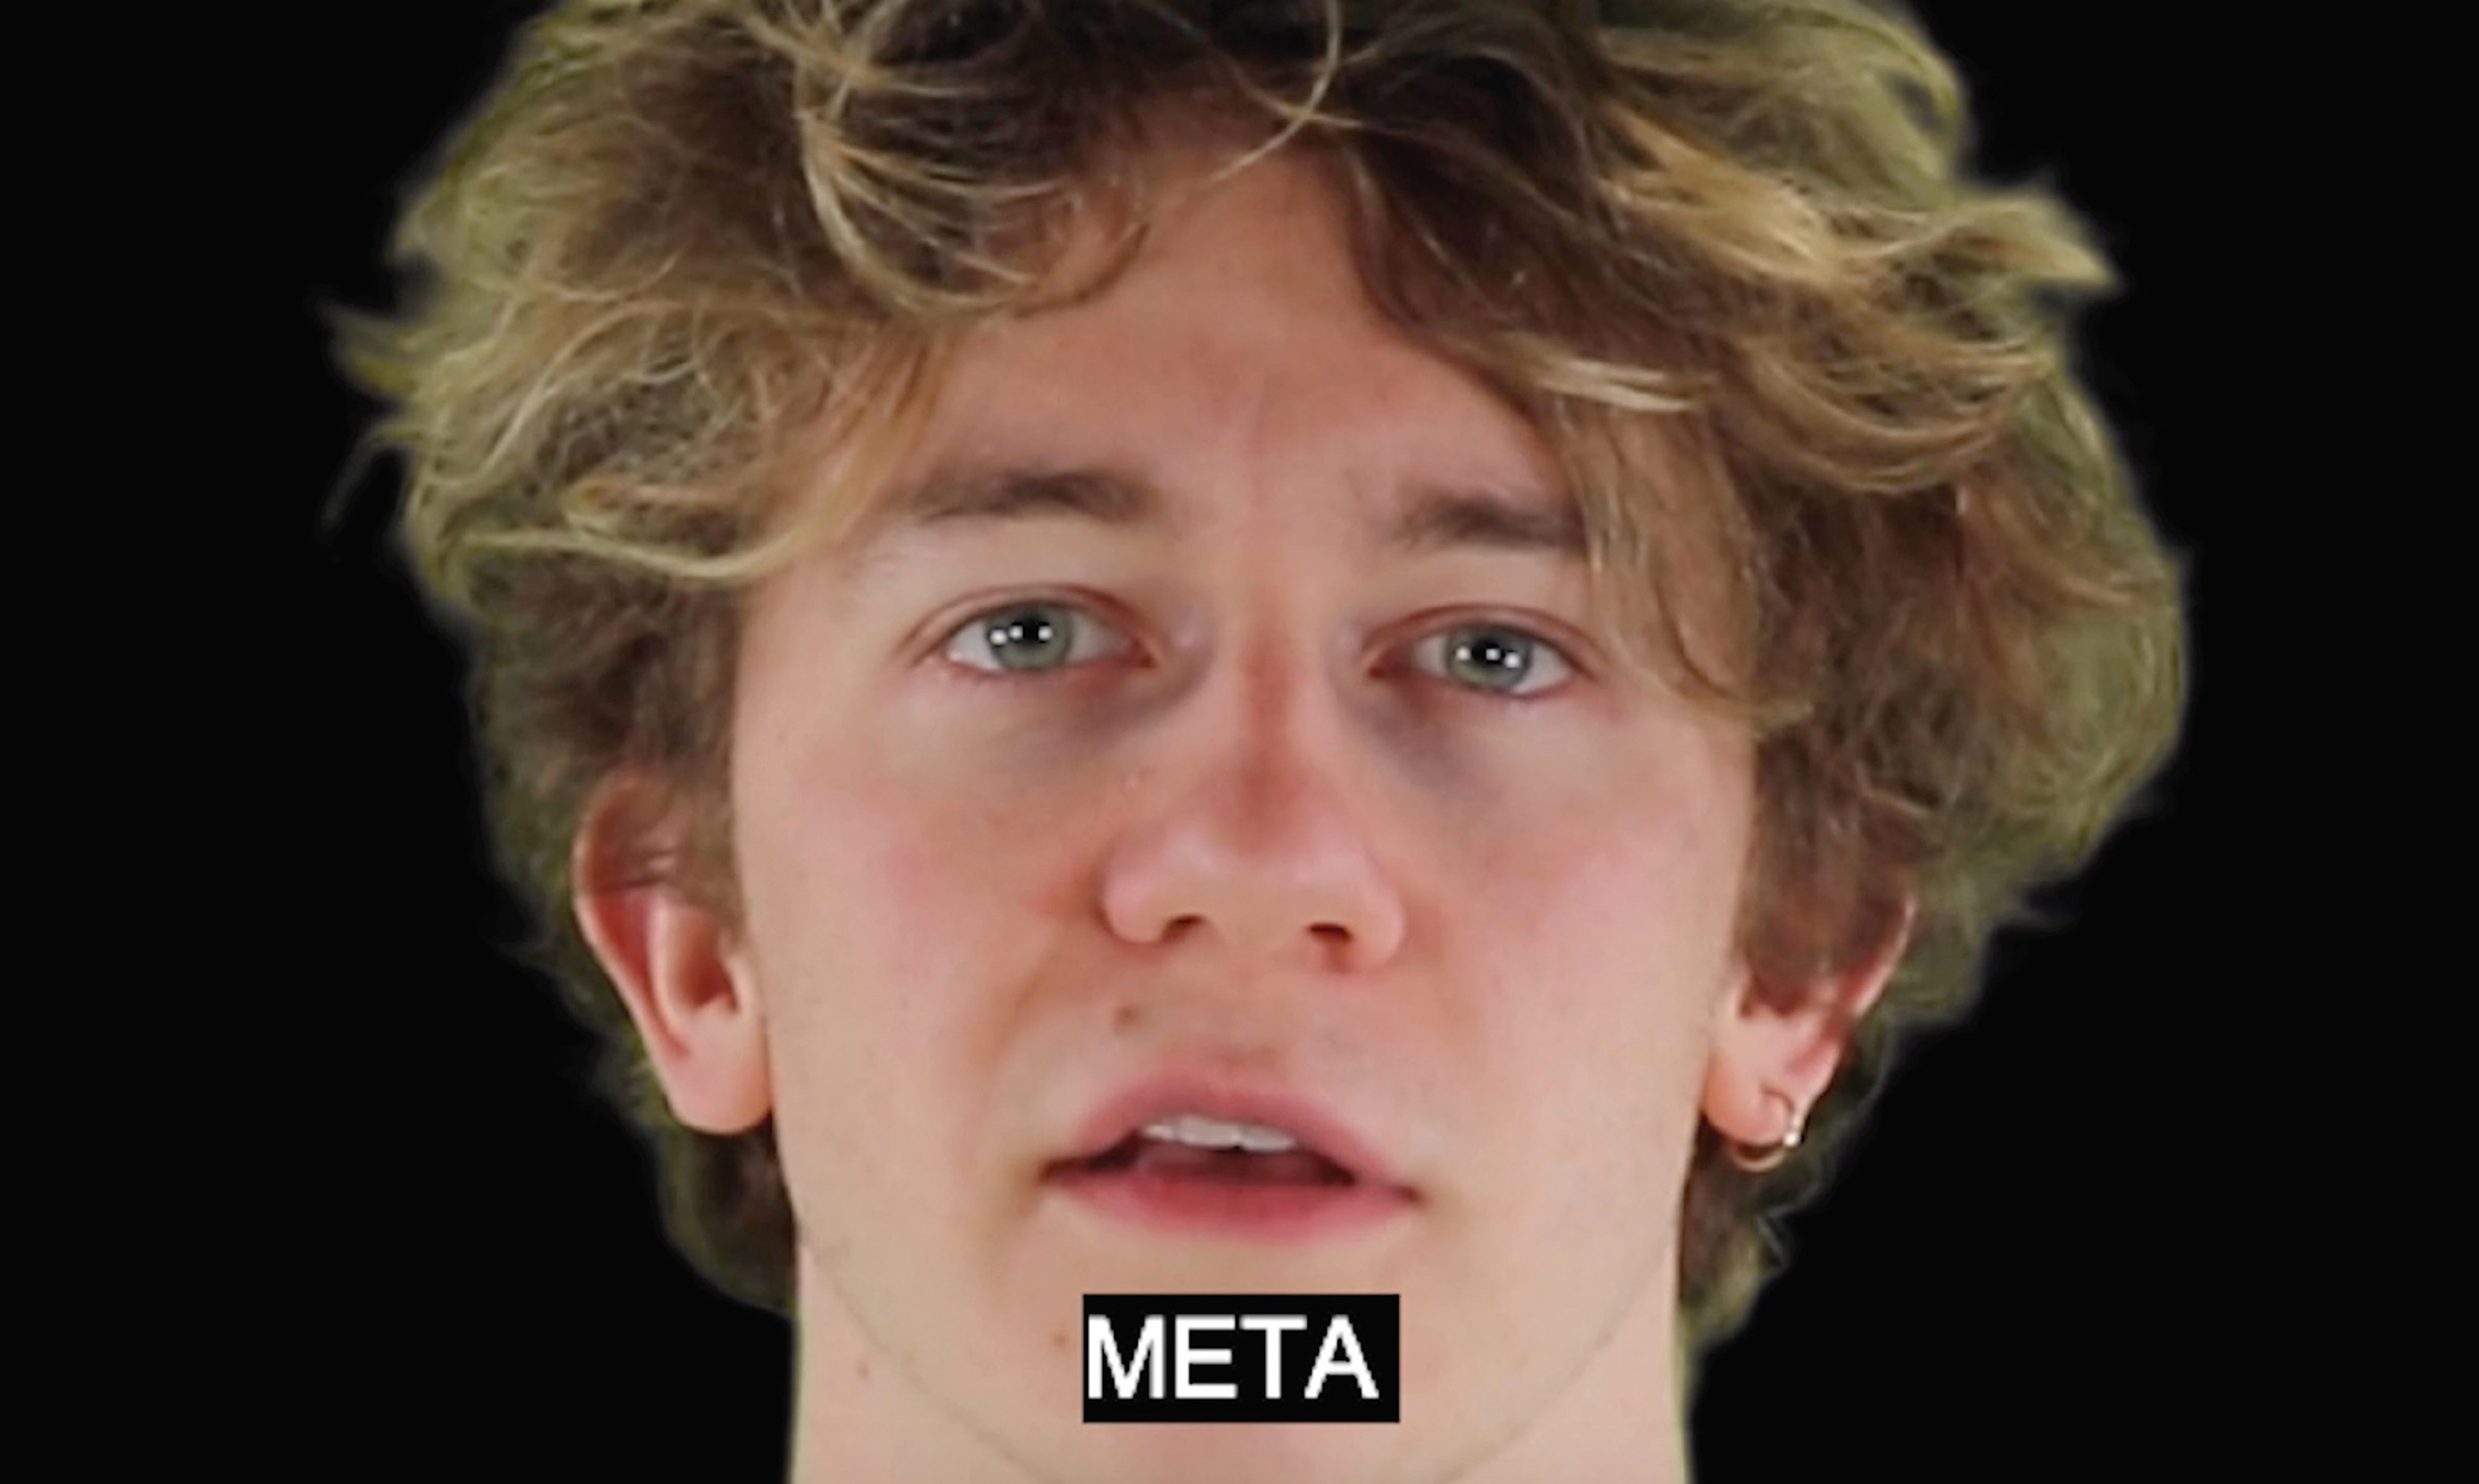 A film still showing a black background with a young males face. He is white and has medium length brown hair. The word 'Meta' is written at the bottom of the screen